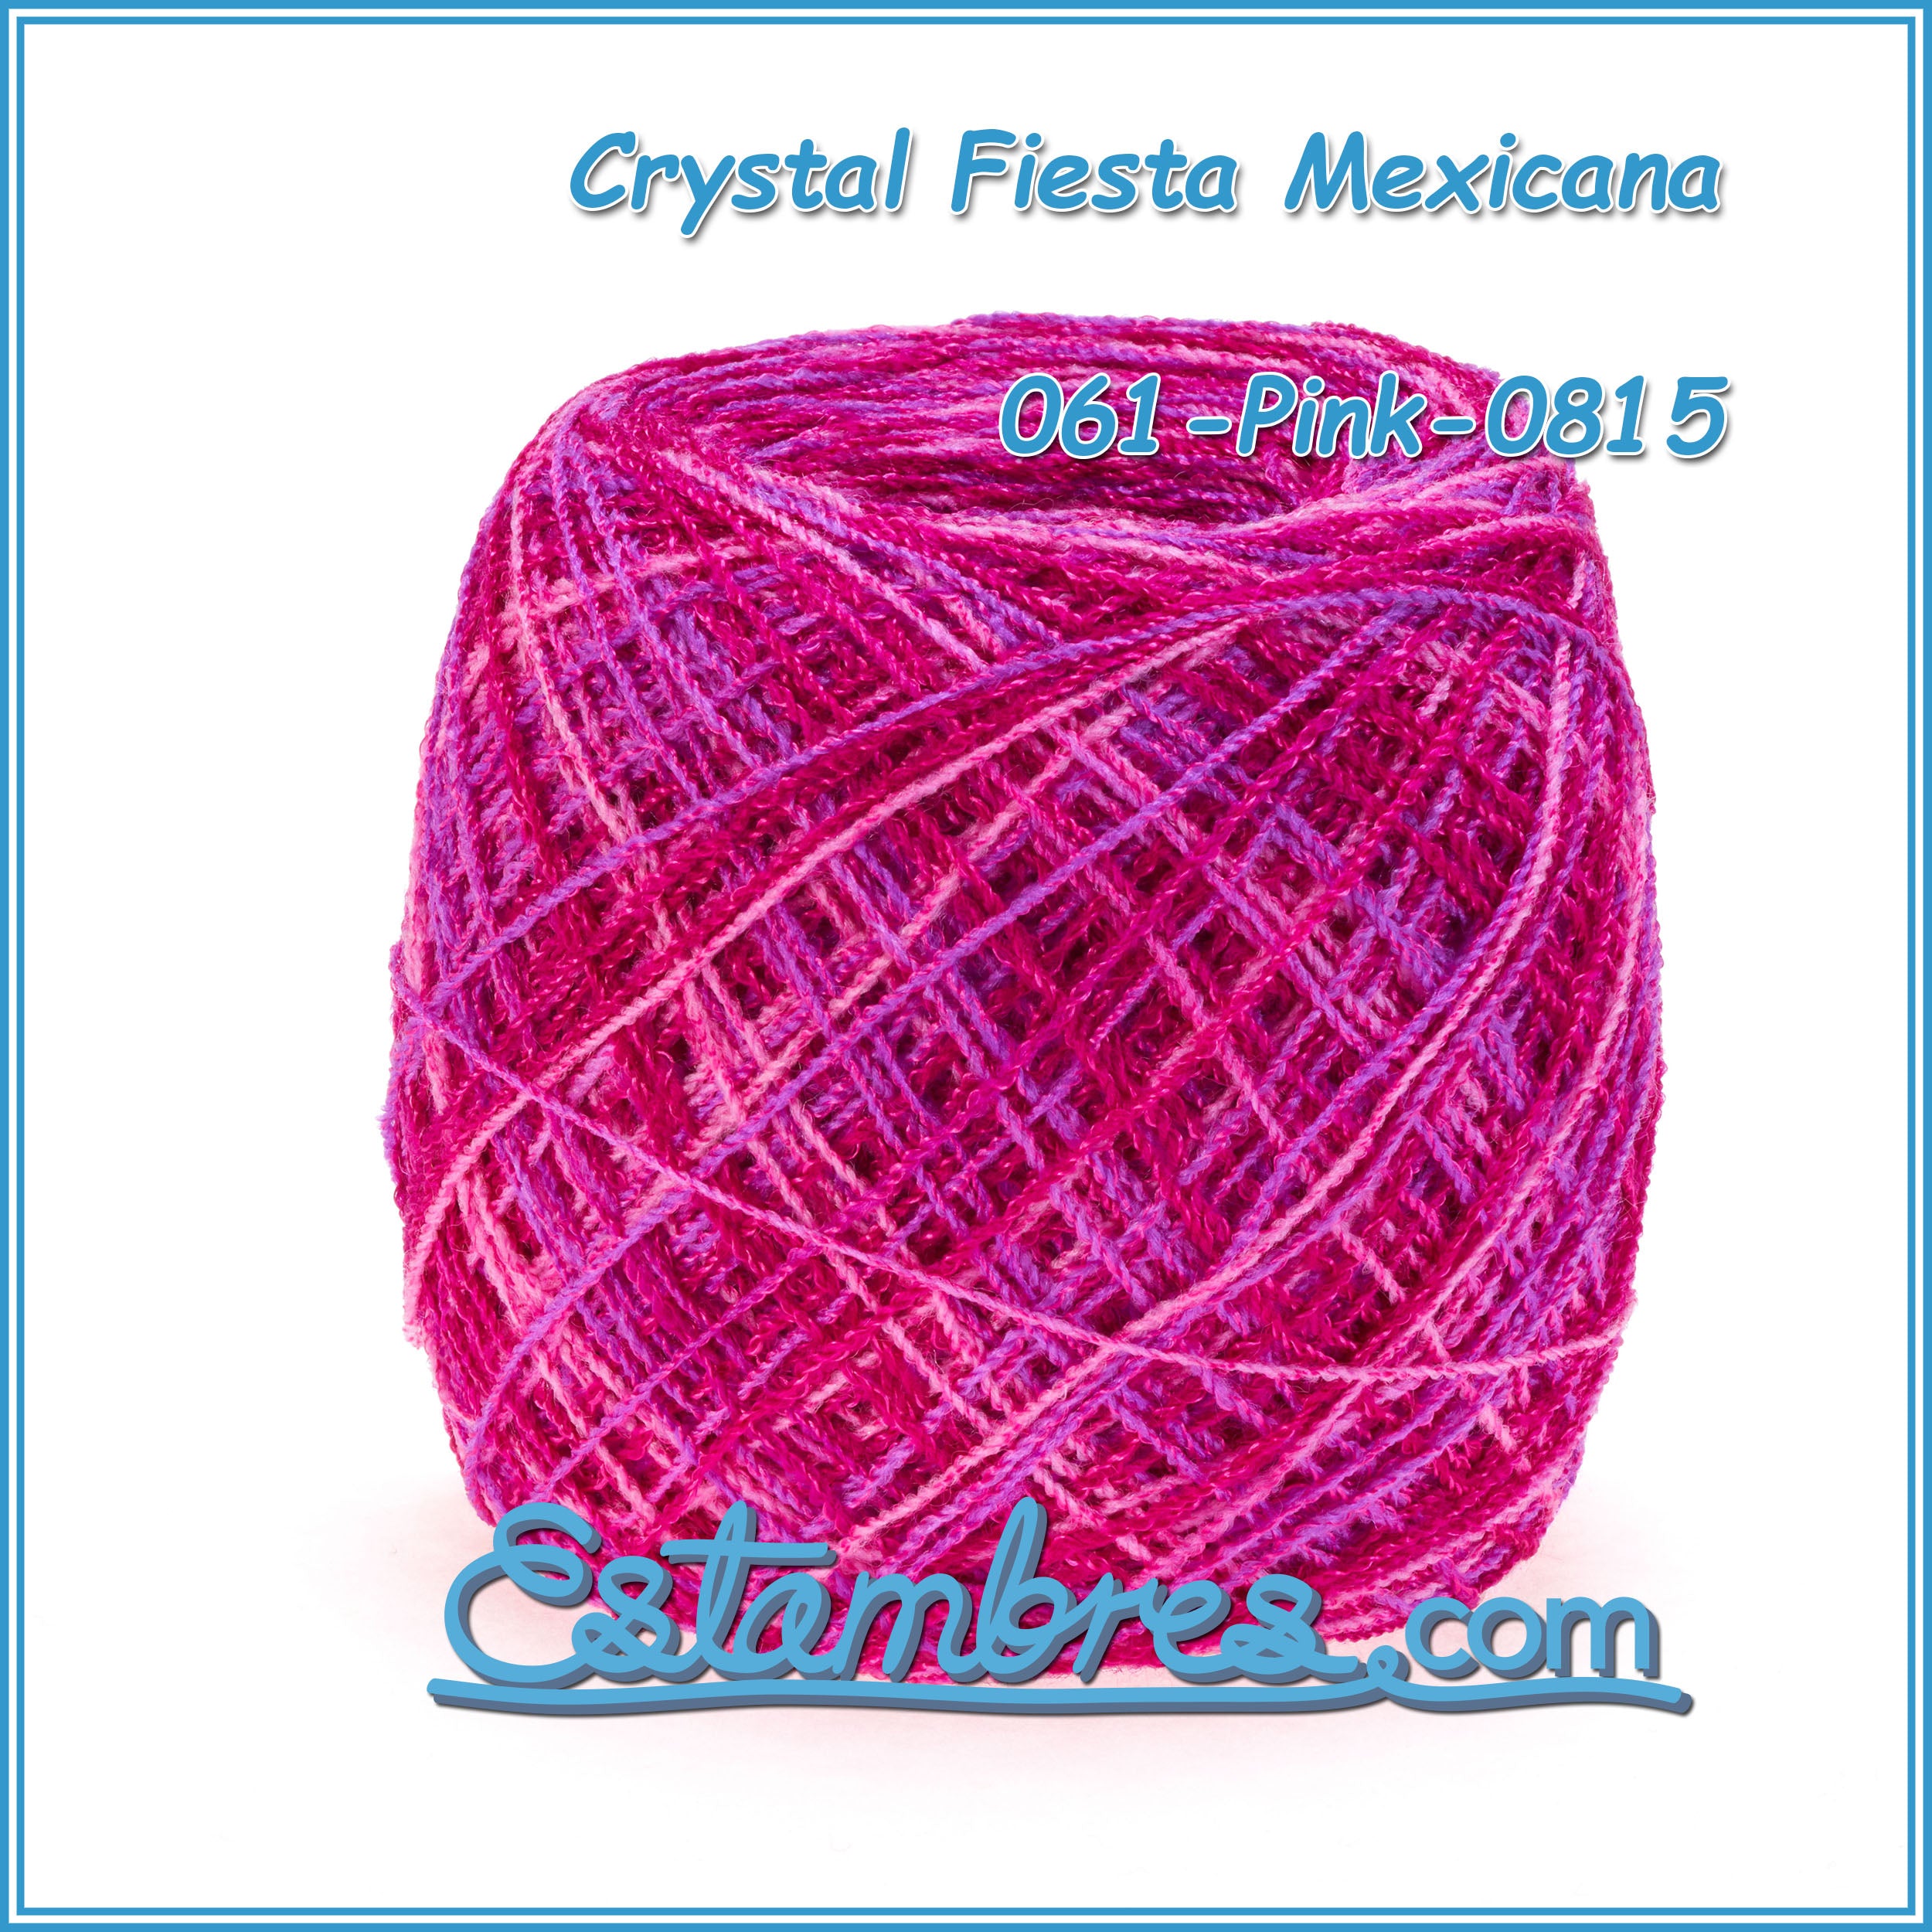 CRYSTAL Fiesta Mexicana [100grs] - 1 of 2